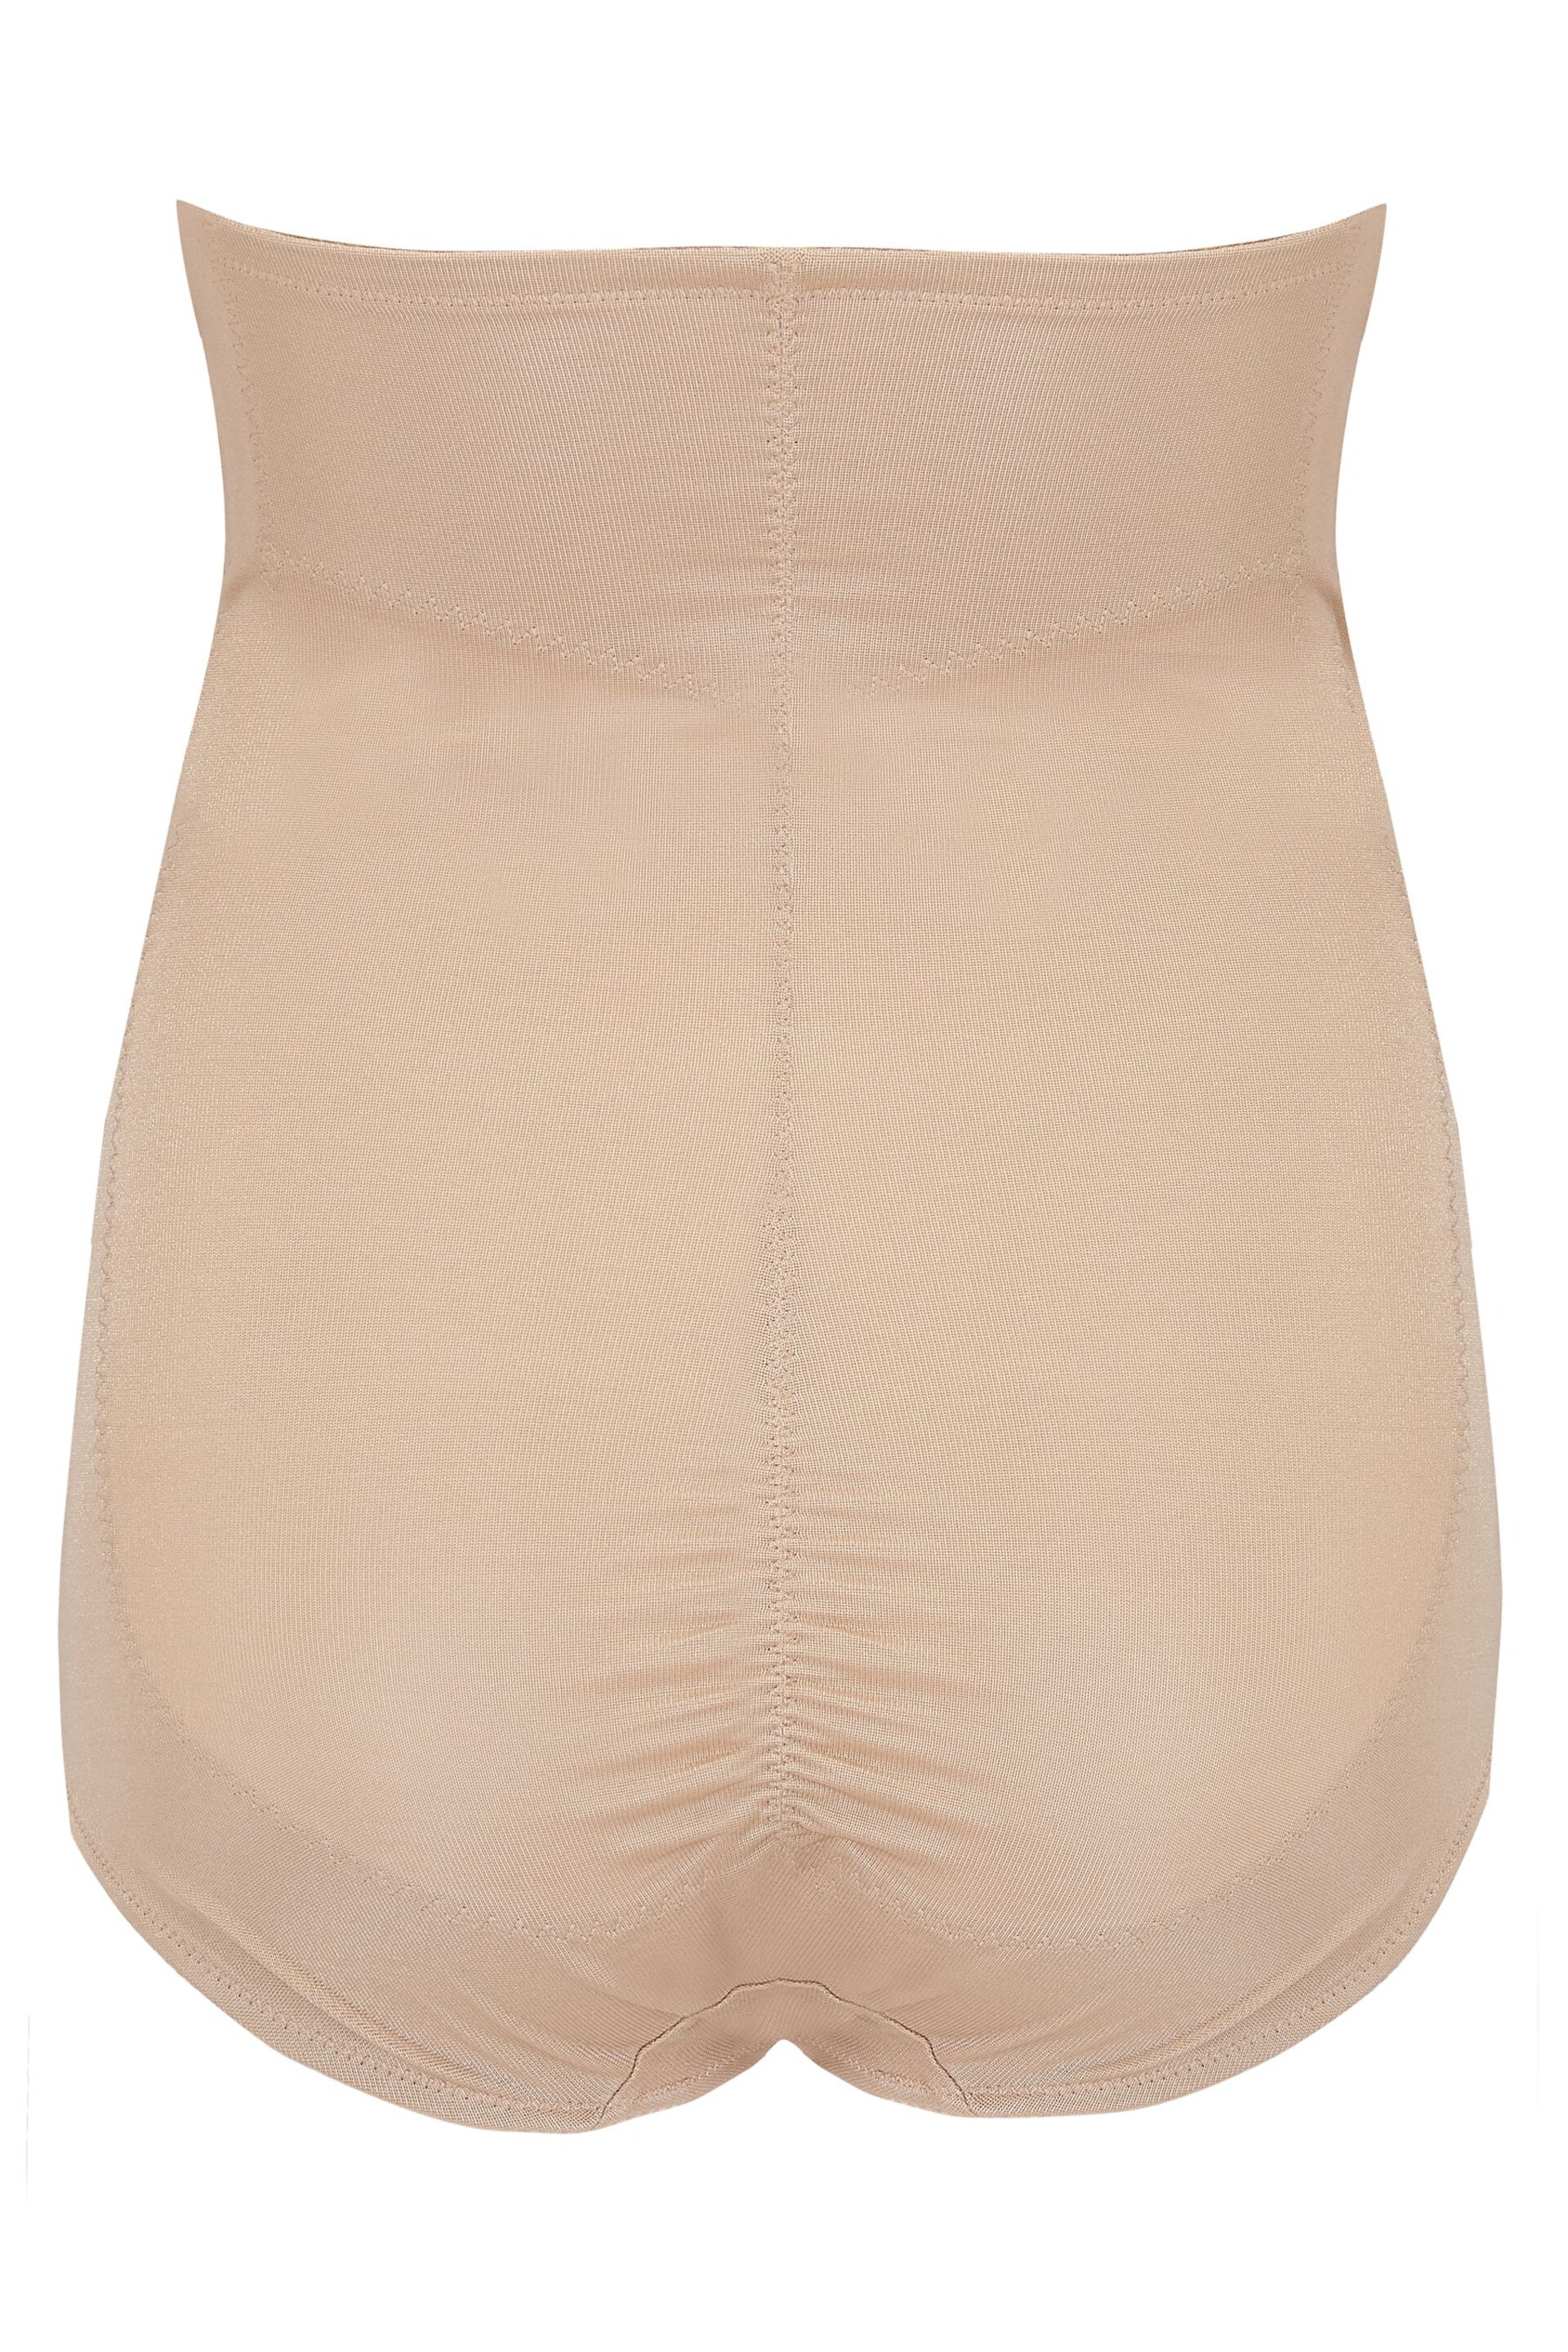 Pour Moi Nude Lingerie Hourglass Shapewear Firm Tummy Control High Waist Knickers - Image 2 of 2